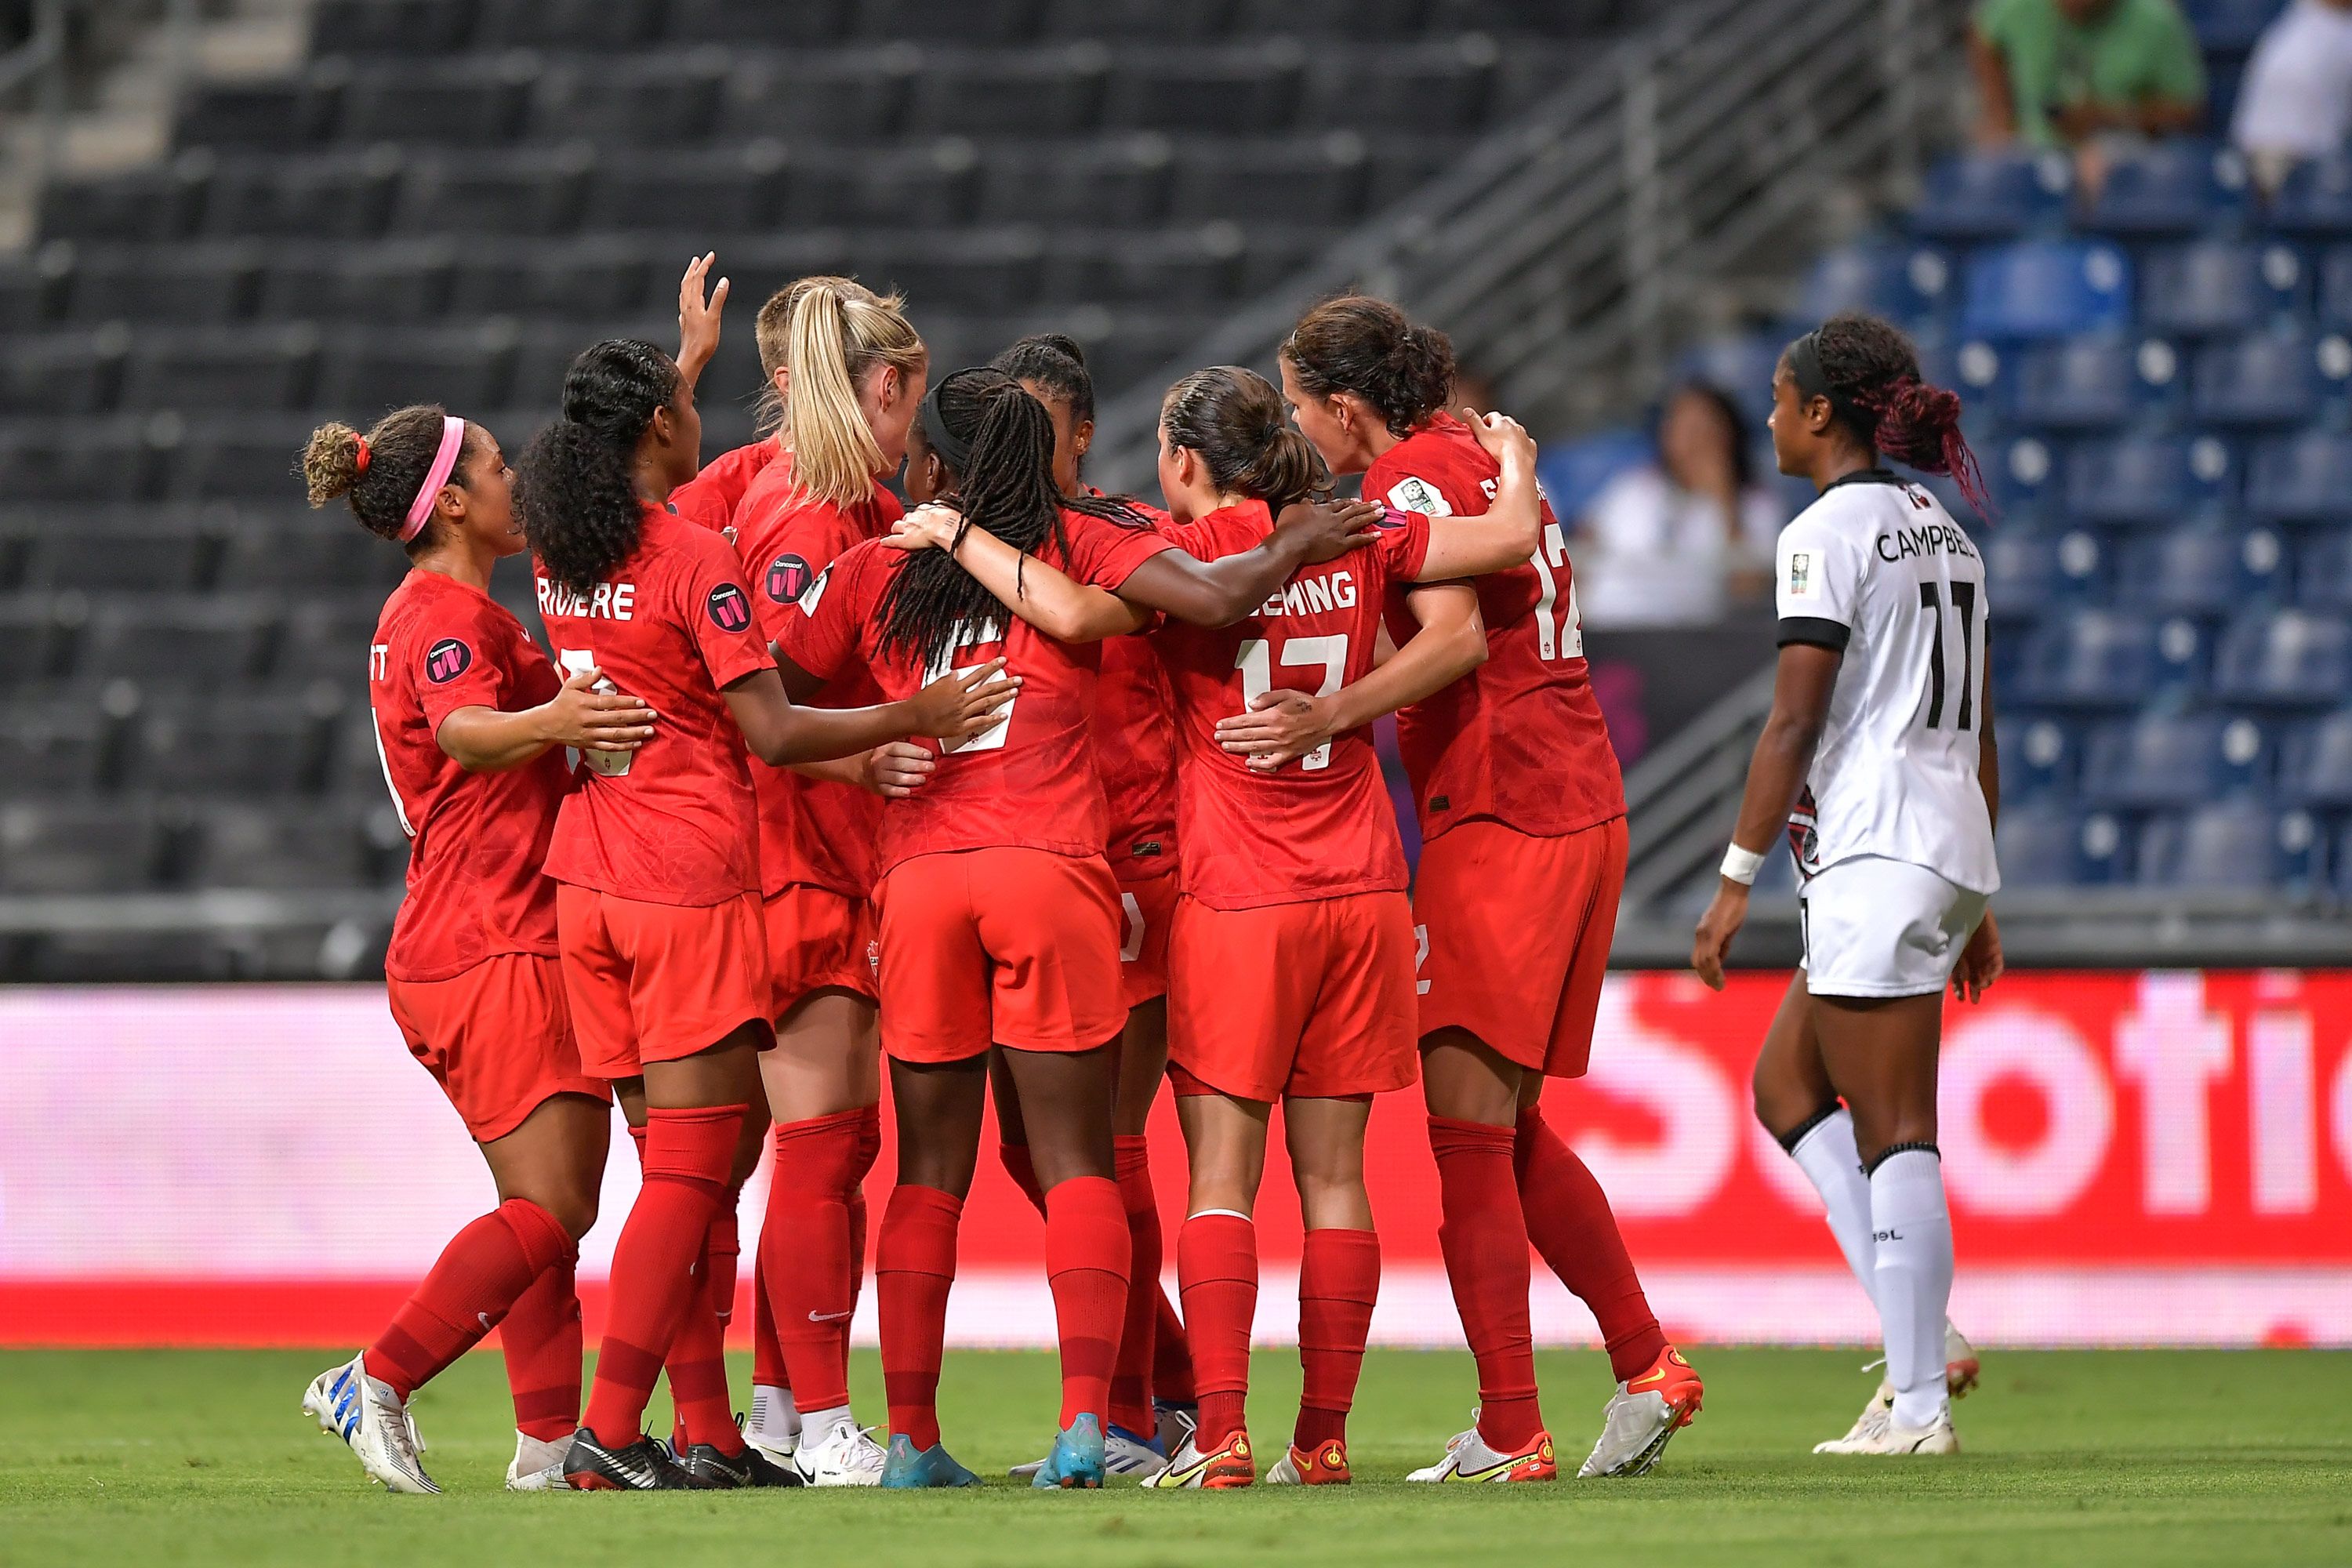 The U.S. Women's National Soccer Team—A Case Study In The Collective Power  Of Women And Doing The Impossible